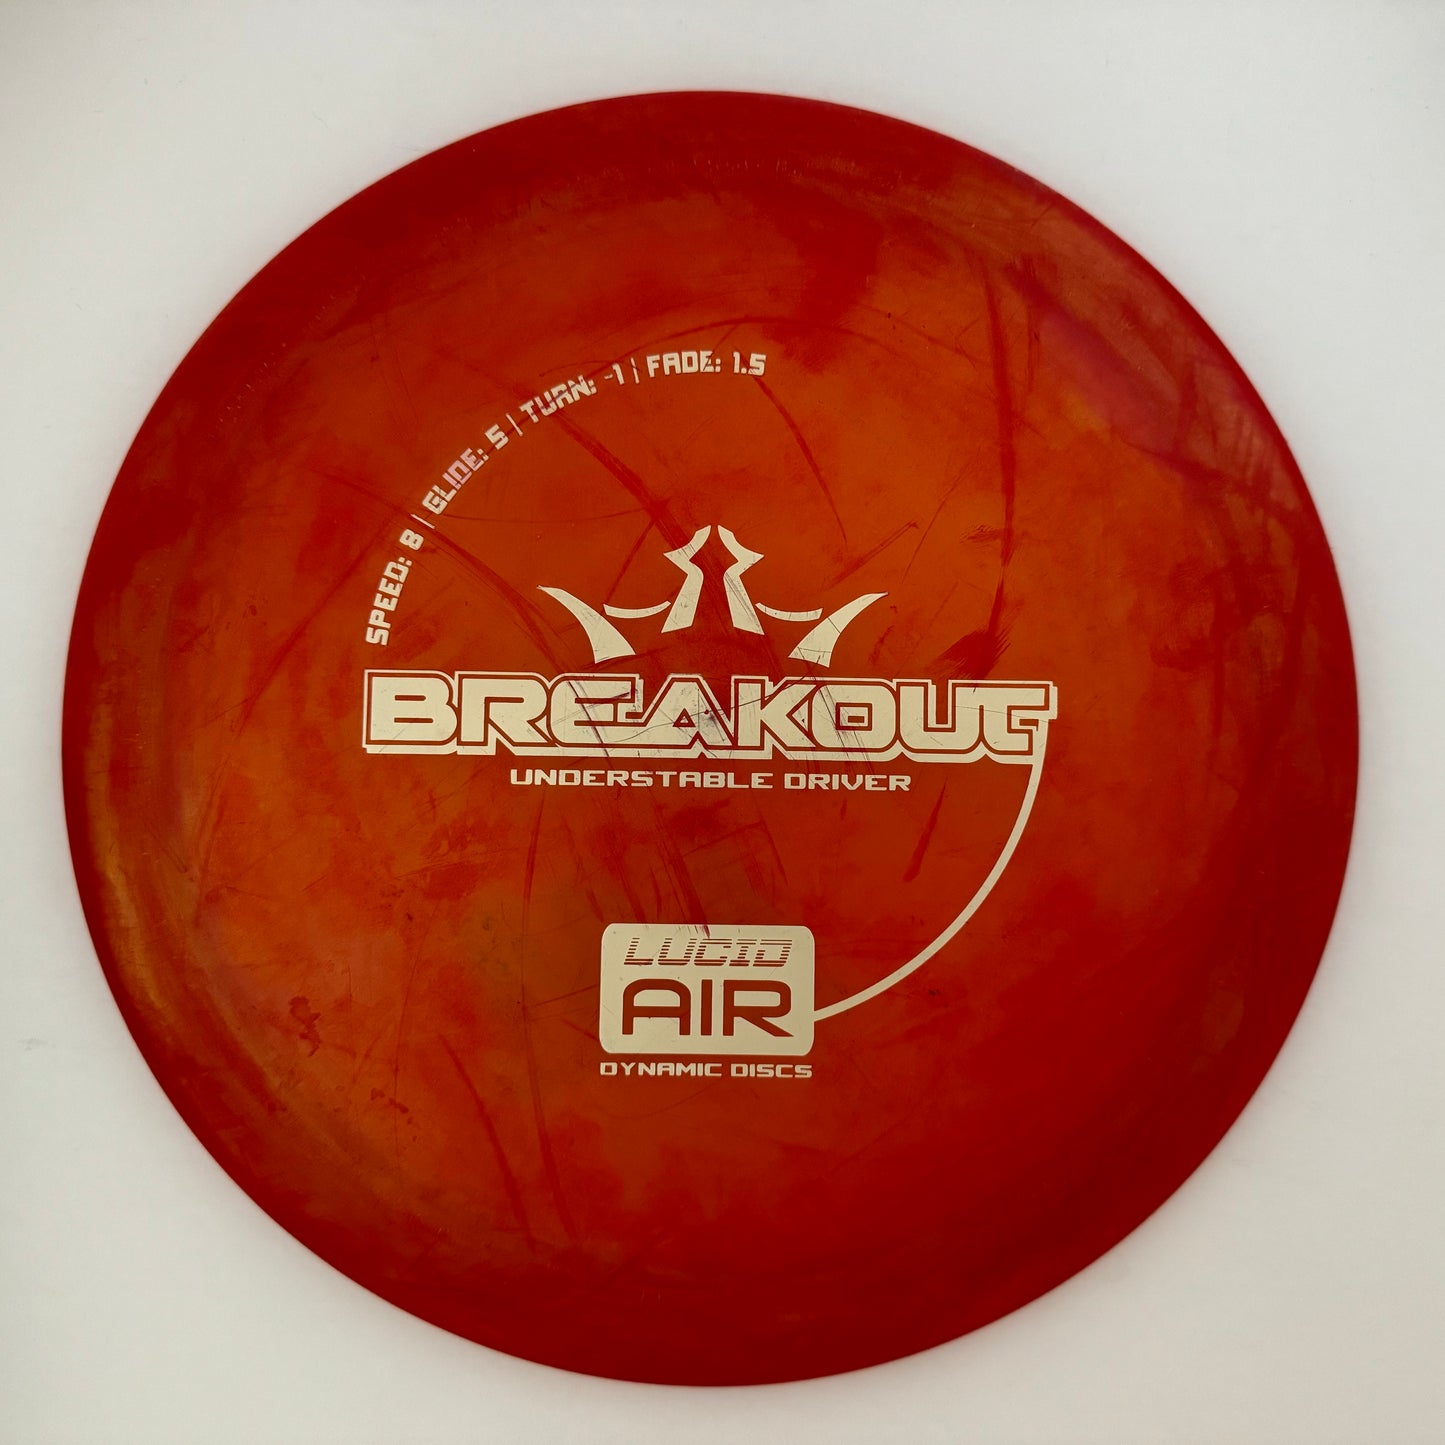 USED - Breakout